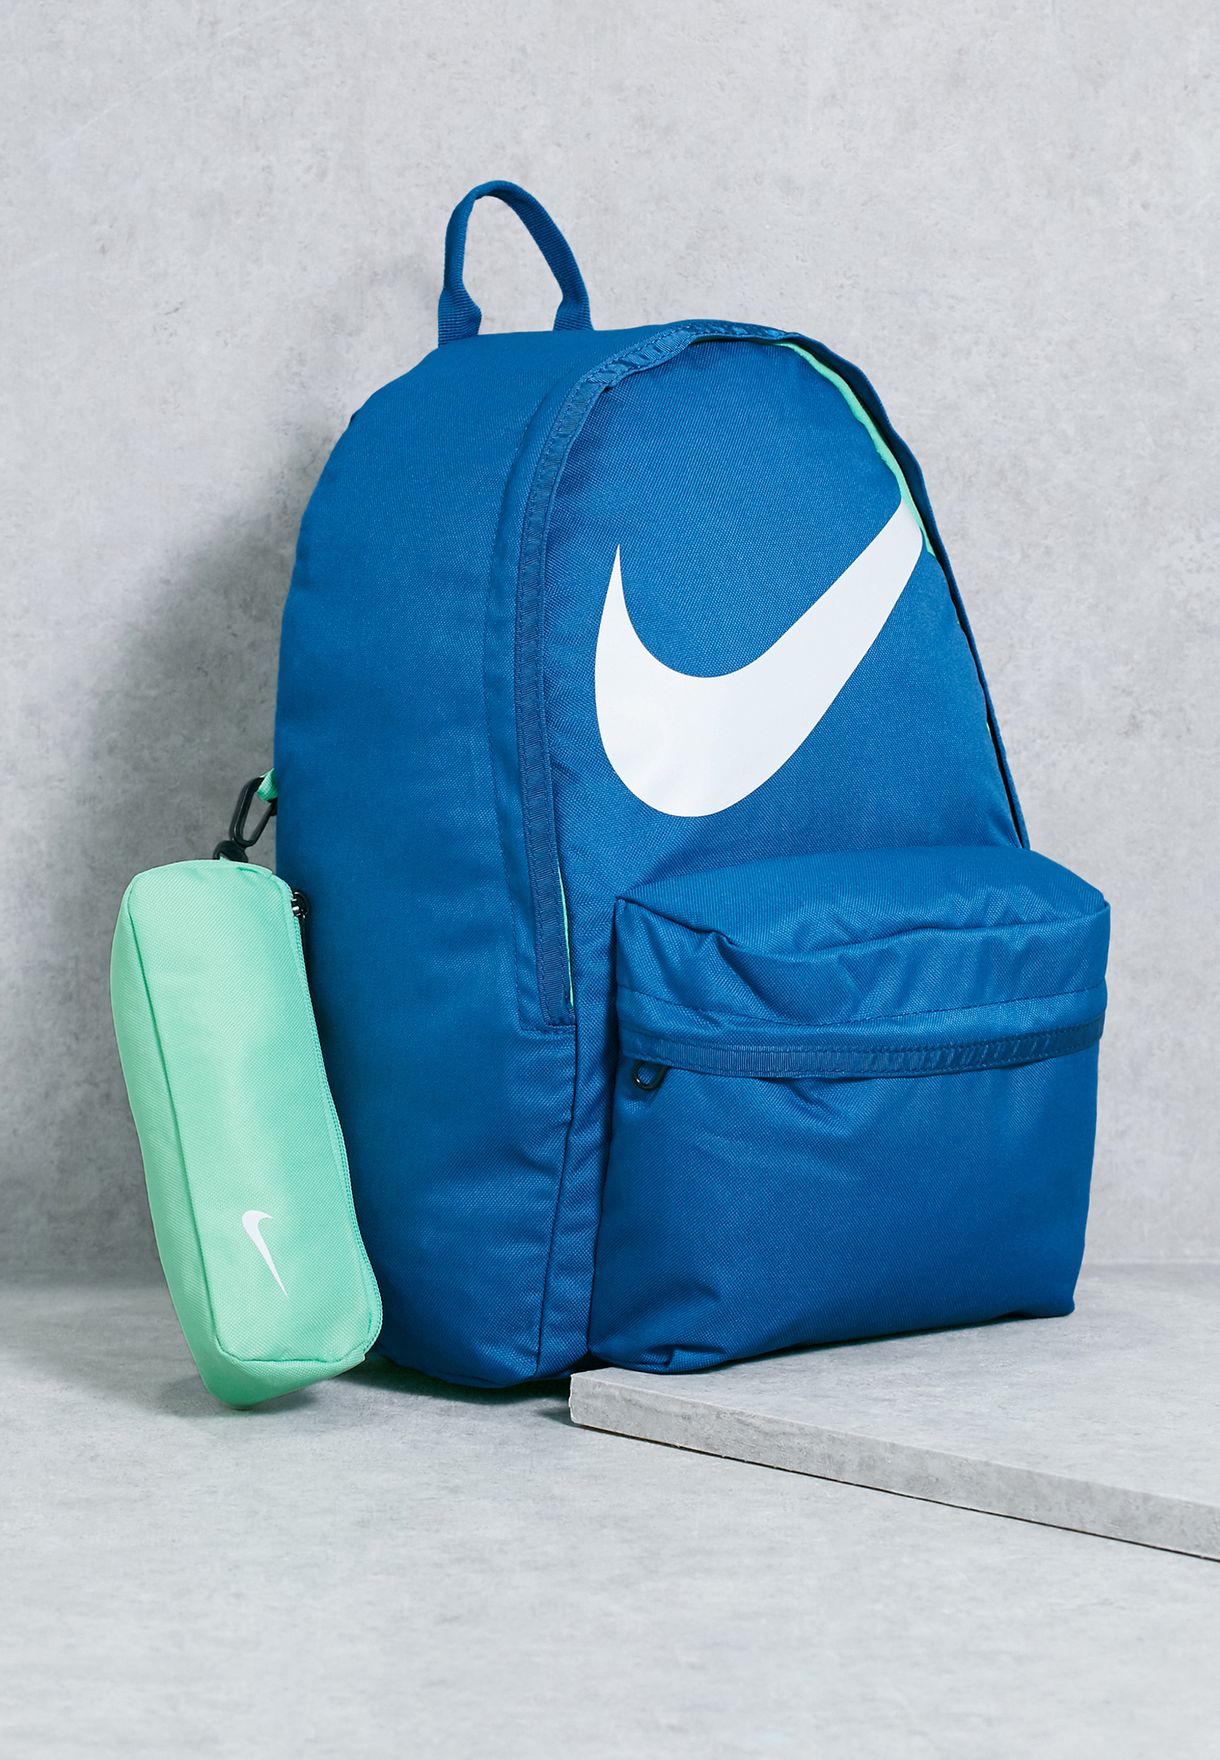 young athletes backpack